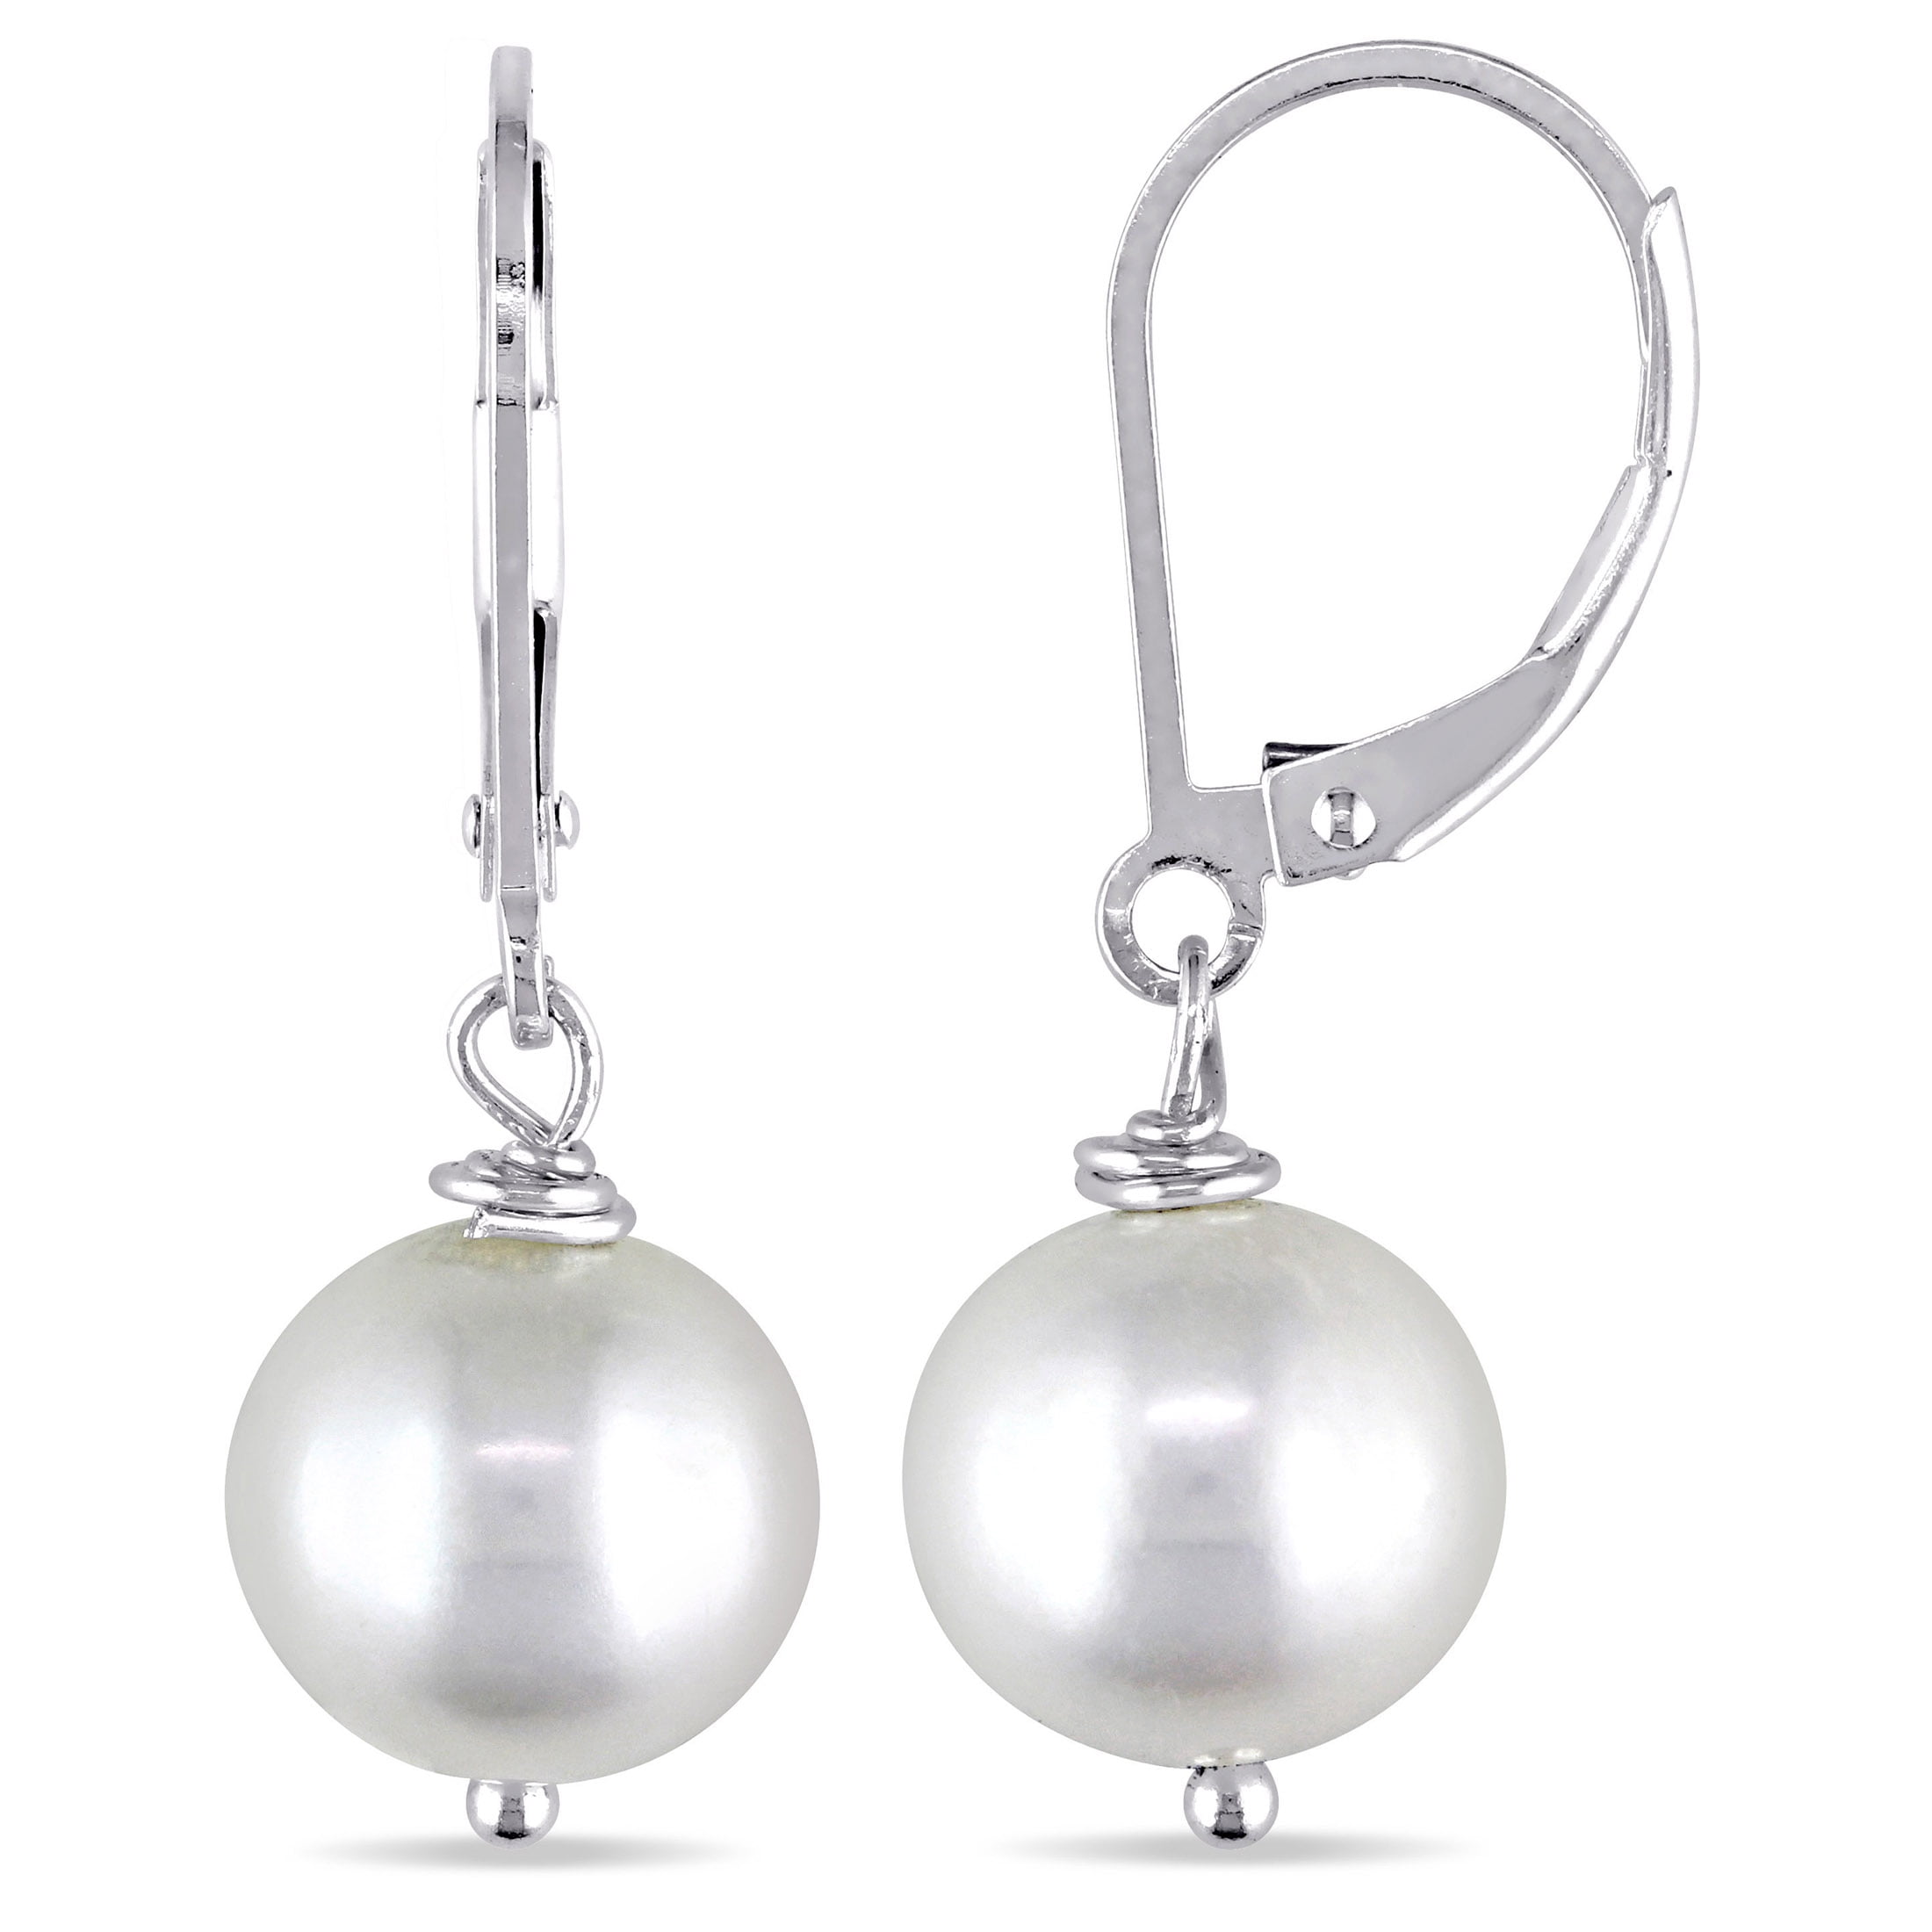 White Pearls Kezef Creations Sterling Silver Cultured Freshwater Pearl Clip On Earrings